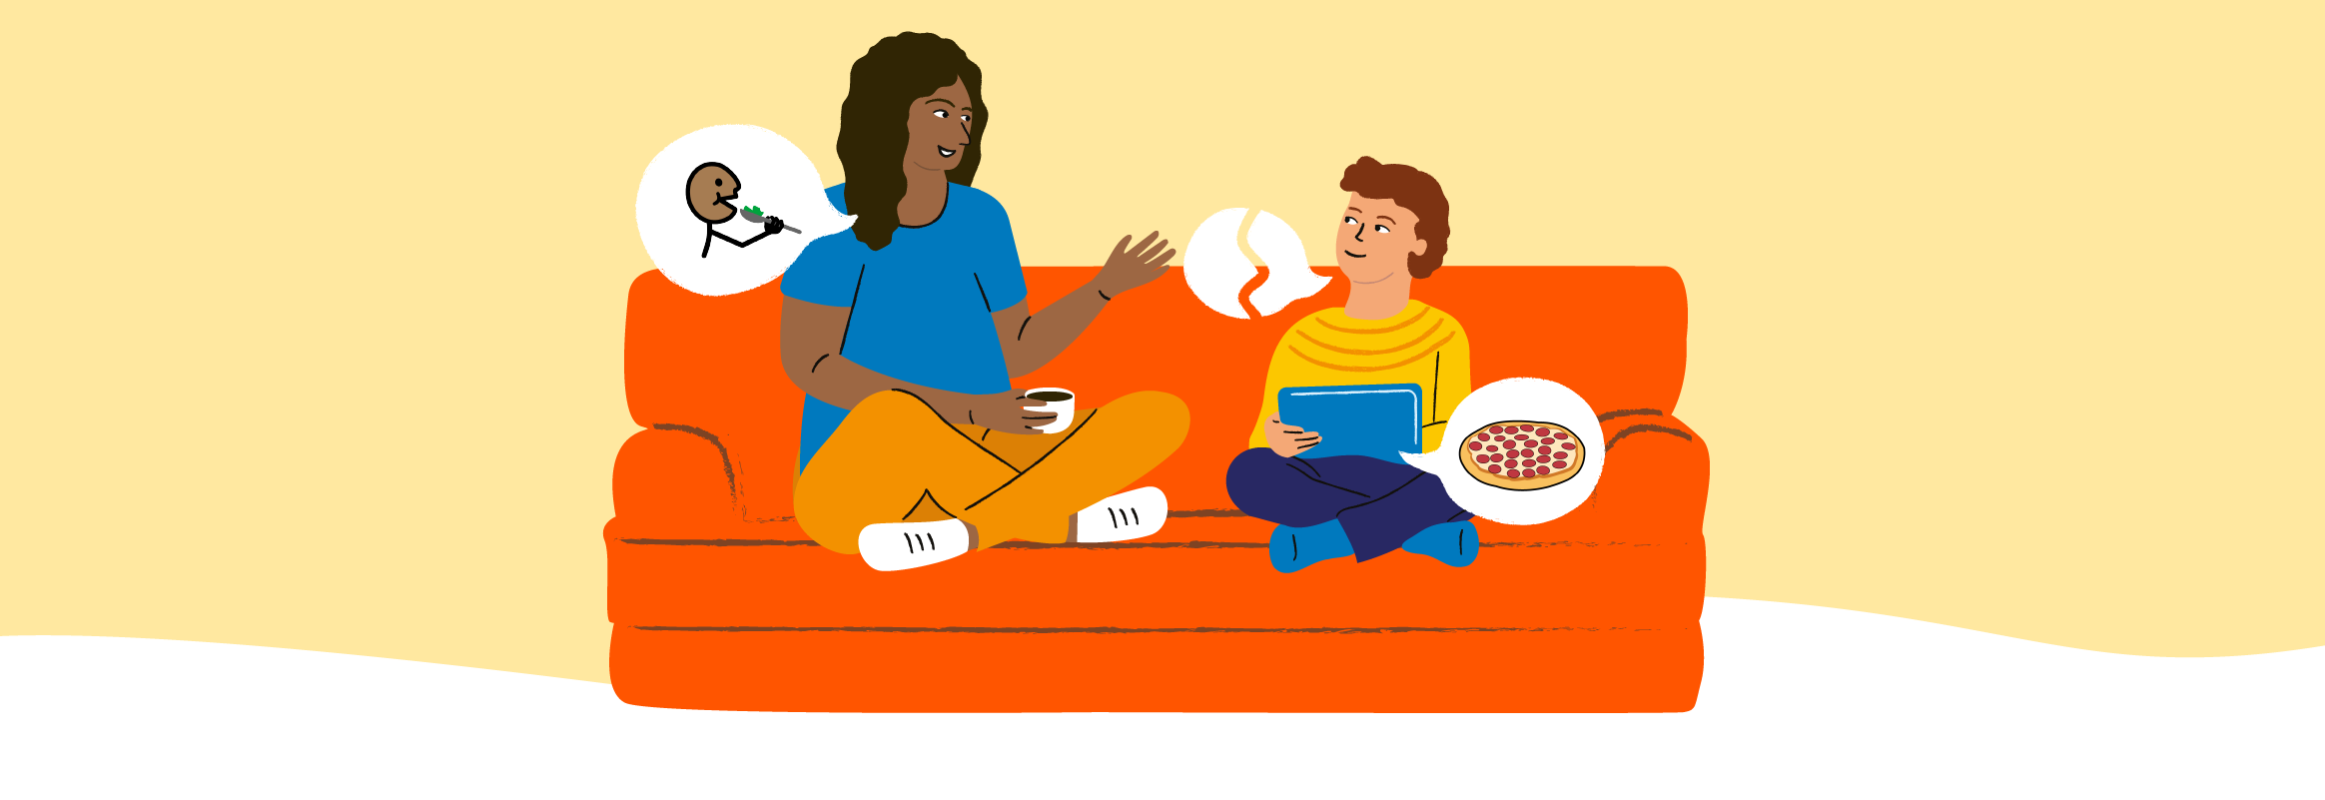 An adult and child shit on a couch together. The adult has a speech bubble with a symbol for eating. The child has a broken speech bubble coming from his mouth and a symbol for a pizza comign from his iPad